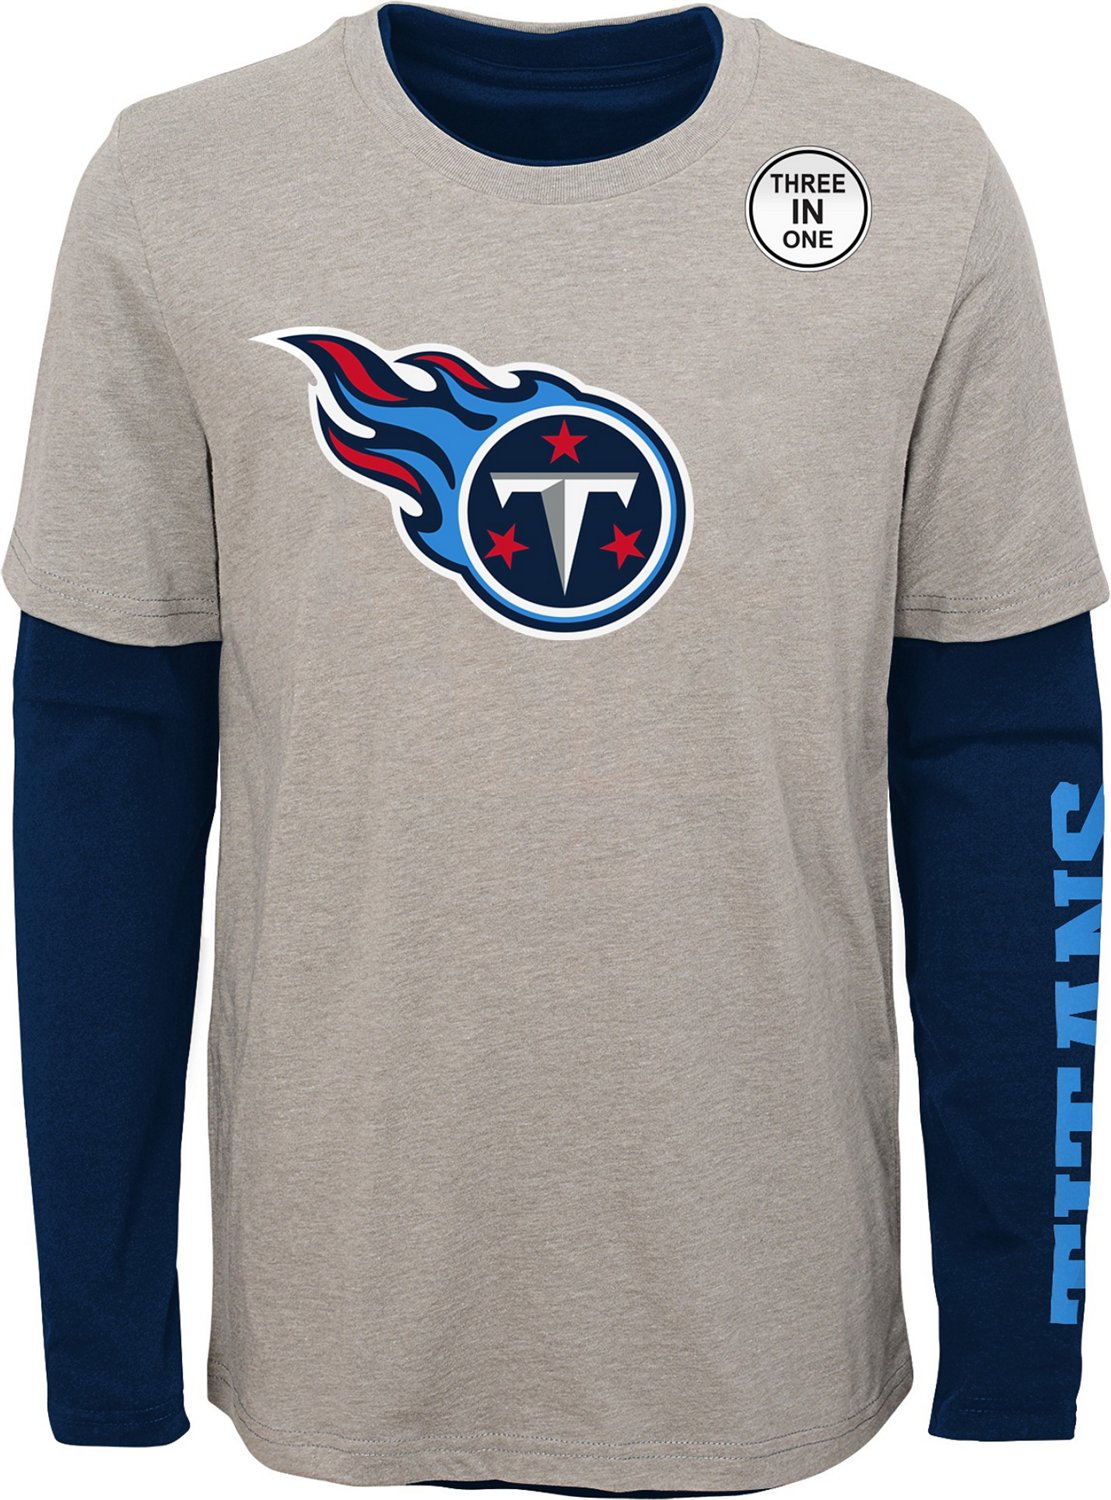 NFL Boys' Tennessee Titans Goal Line Stand 3-in-1 T-shirt Combo | Academy